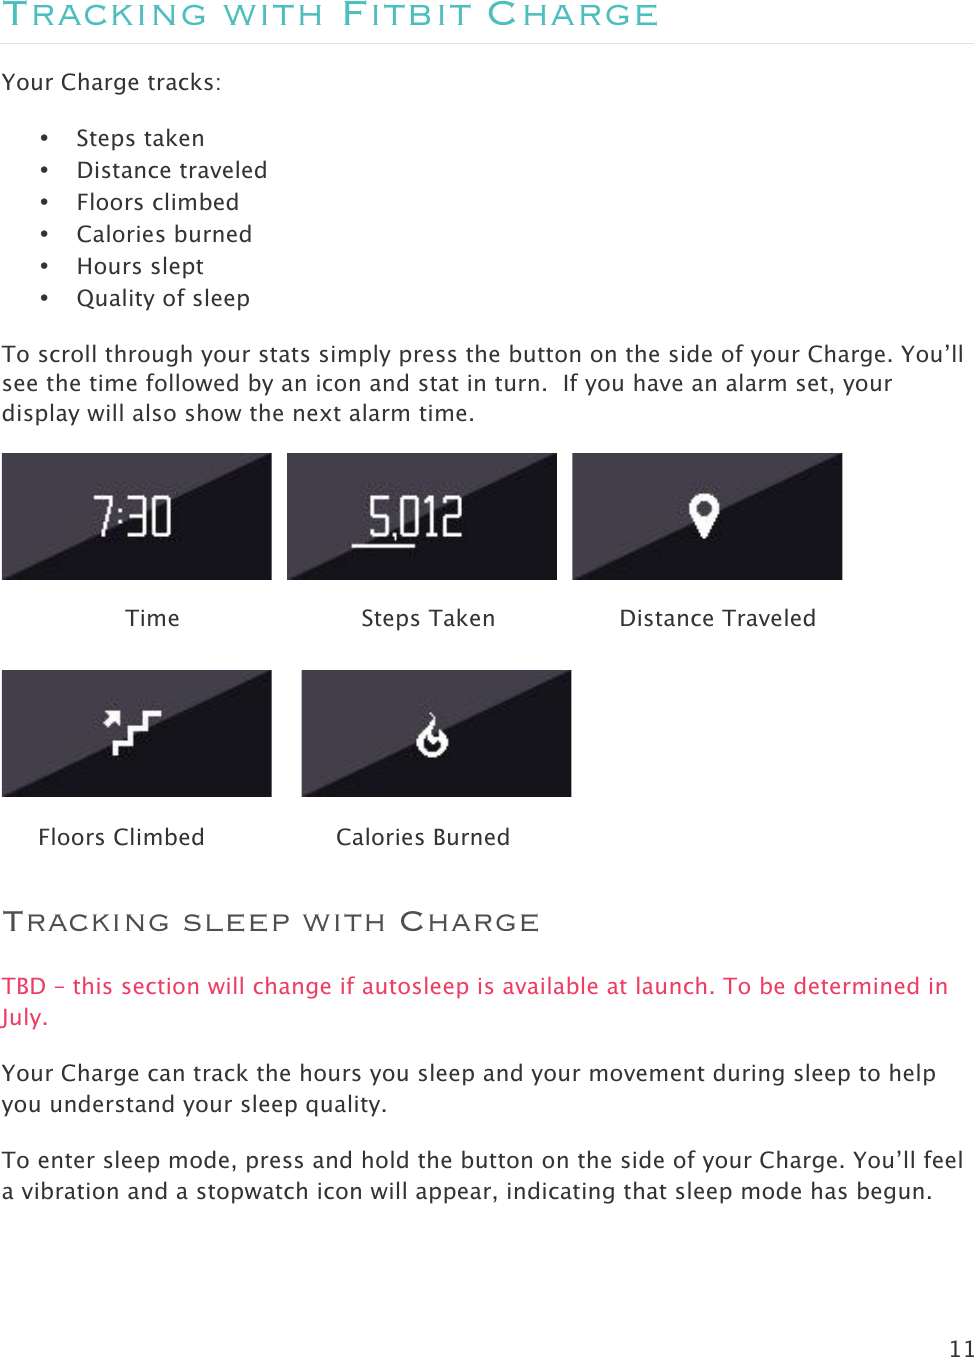 11  Tracking with Fitbit Charge Your Charge tracks:  • Steps taken • Distance traveled • Floors climbed • Calories burned • Hours slept • Quality of sleep To scroll through your stats simply press the button on the side of your Charge. You’ll see the time followed by an icon and stat in turn.  If you have an alarm set, your display will also show the next alarm time.                          Time                         Steps Taken                 Distance Traveled            Floors Climbed                  Calories Burned                  Tracking sleep with Charge TBD – this section will change if autosleep is available at launch. To be determined in July. Your Charge can track the hours you sleep and your movement during sleep to help you understand your sleep quality.  To enter sleep mode, press and hold the button on the side of your Charge. You’ll feel a vibration and a stopwatch icon will appear, indicating that sleep mode has begun.  